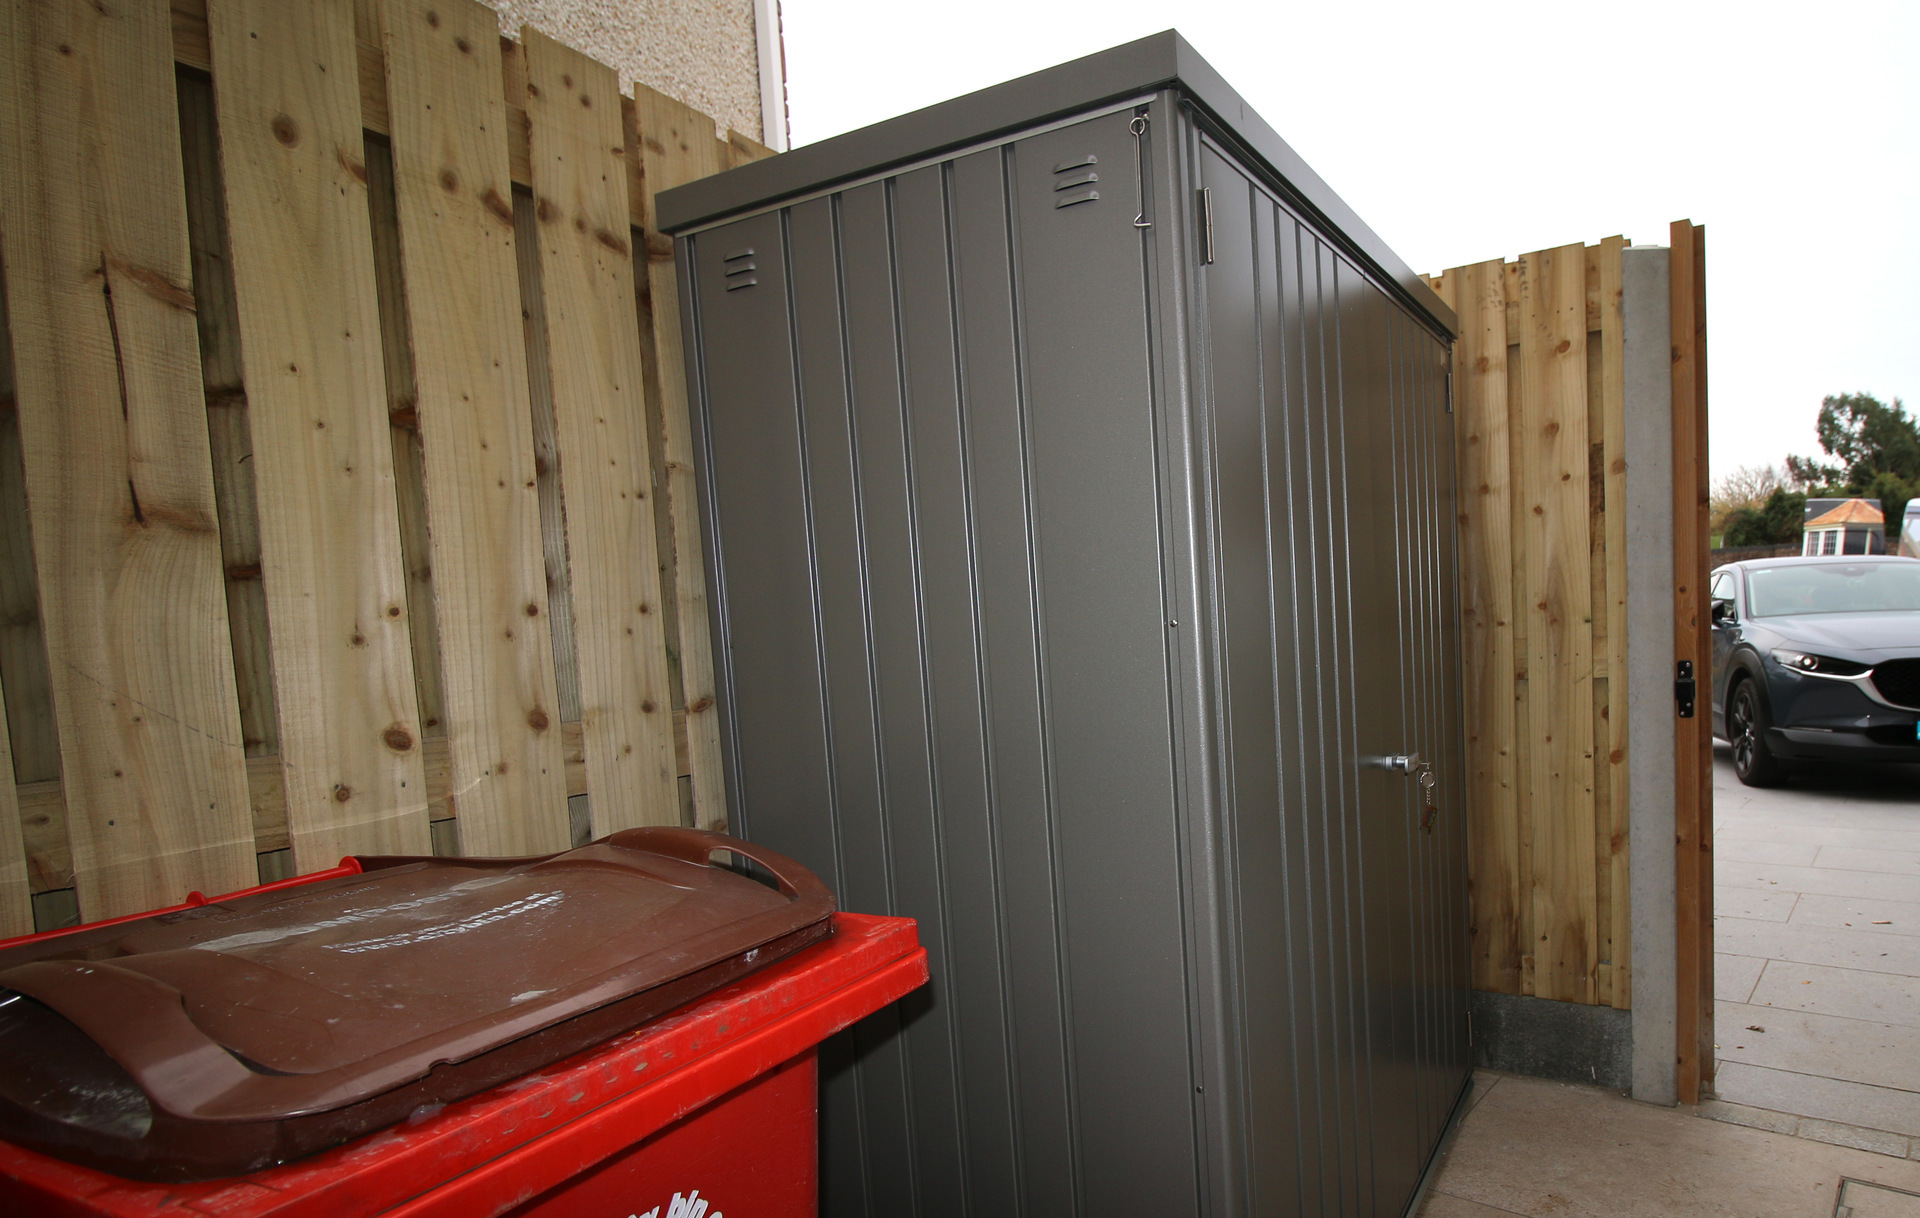 The superb quality and style of the Biohort Equipment Locker 150 in metallic quartz grey  | supplied + installed in Beaumont, Dublin 9 by Owen Chubb Landscapers. Ireland's # 1 Biohort Dealer and Biohort Certified Installation Partner. Tel 087-2306 128.